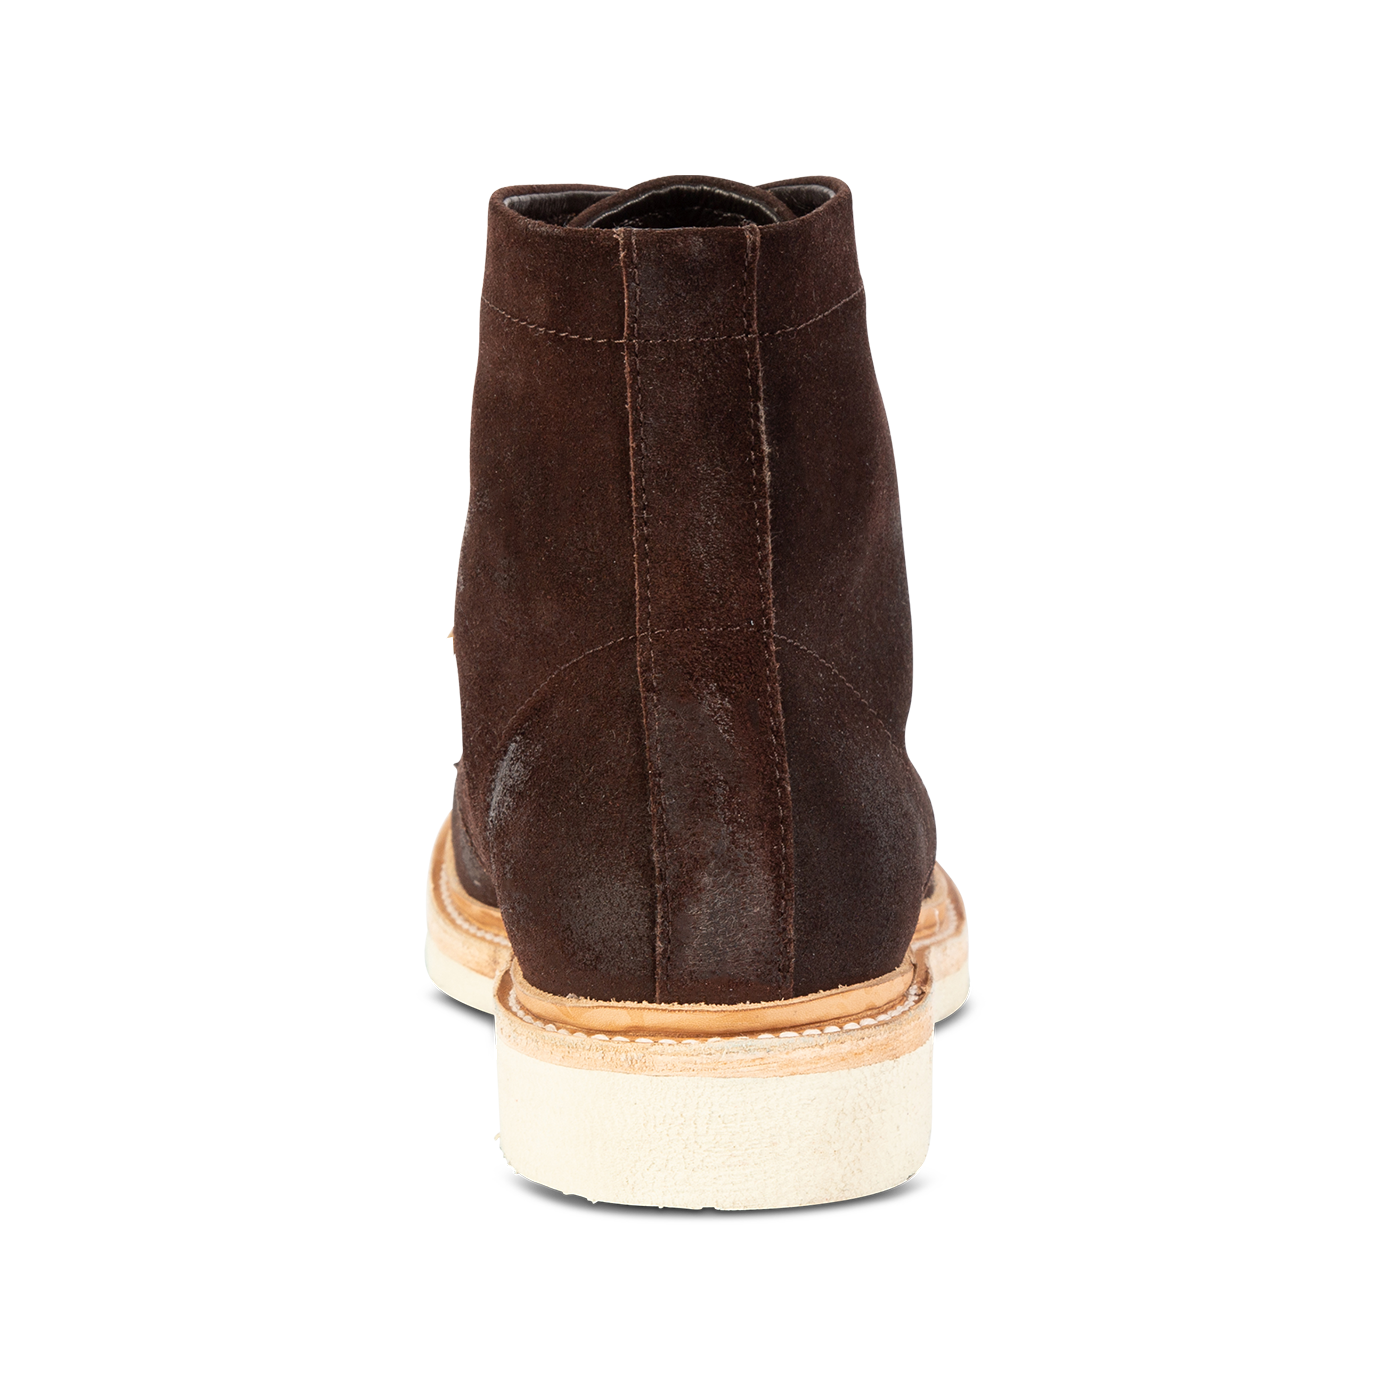 Back view showing suede upper and contrasting soft sole on FREEBIRD men's Wheeler brown suede shoe